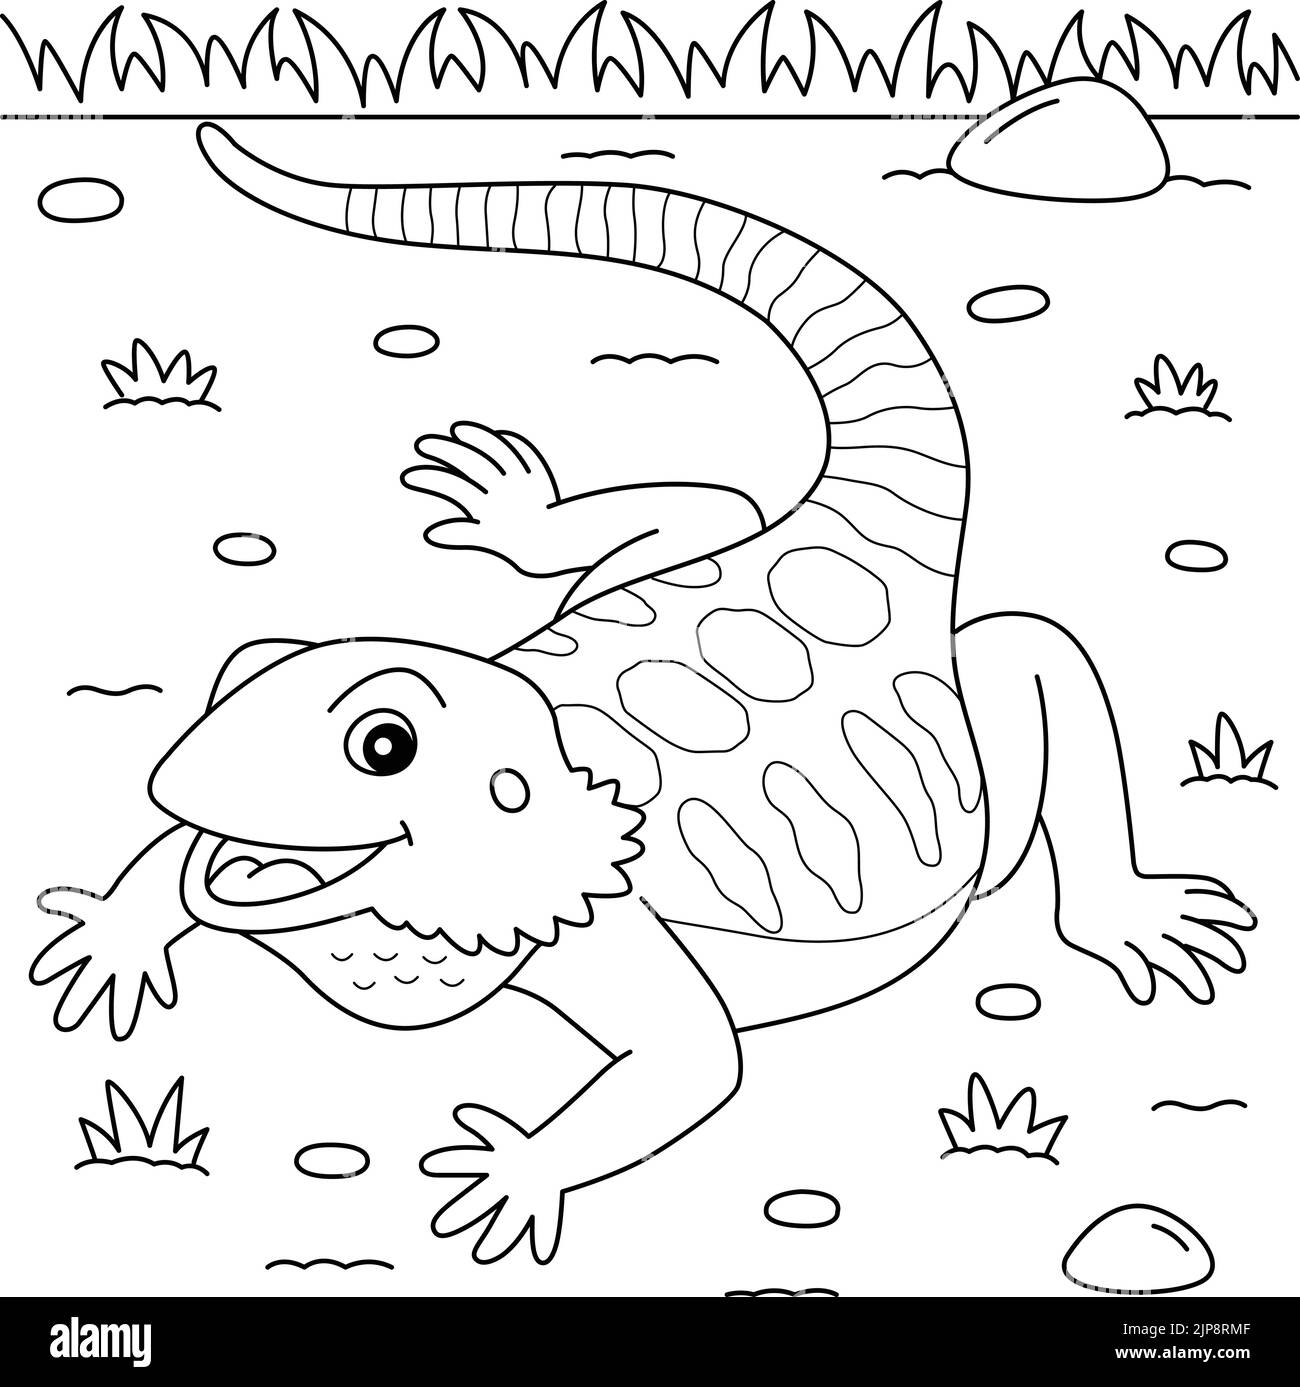 Bearded Dragon Animal Coloring Page for Kids Stock Vector